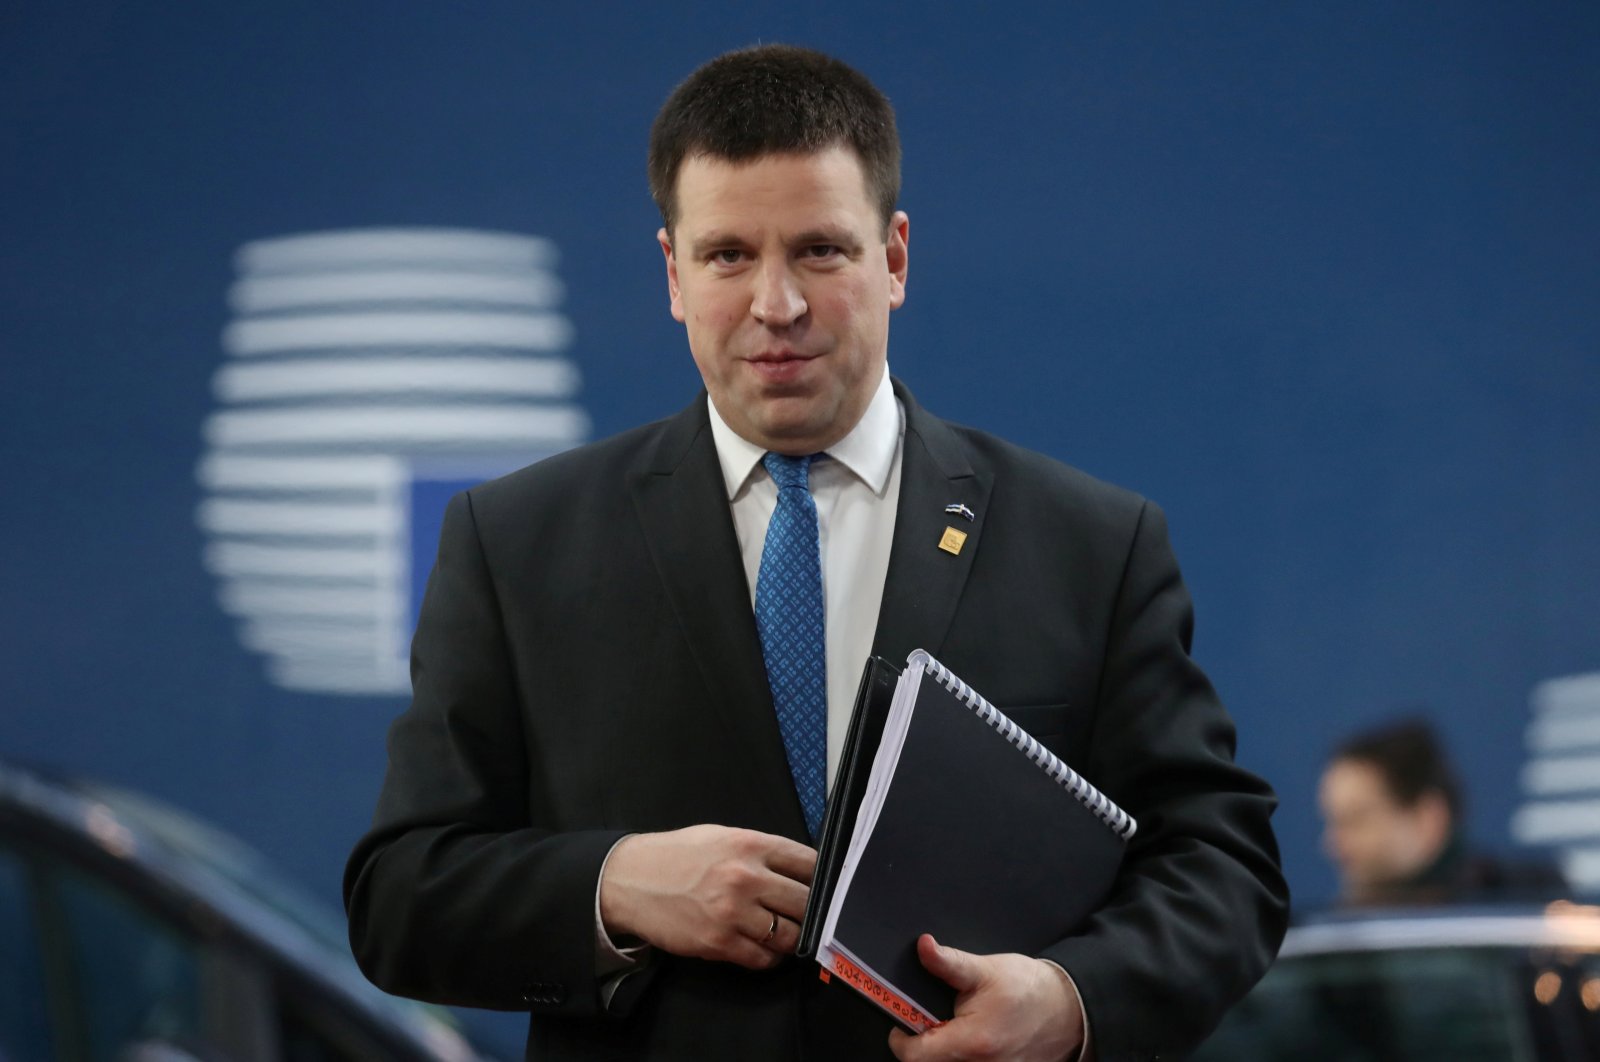  Estonia's Prime Minister Juri Ratas arrives for the second day of the European Union leaders summit, held to discuss the EU's long-term budget for 2021-2027, in Brussels, Belgium, Feb. 21, 2020. (Reuters File Photo)